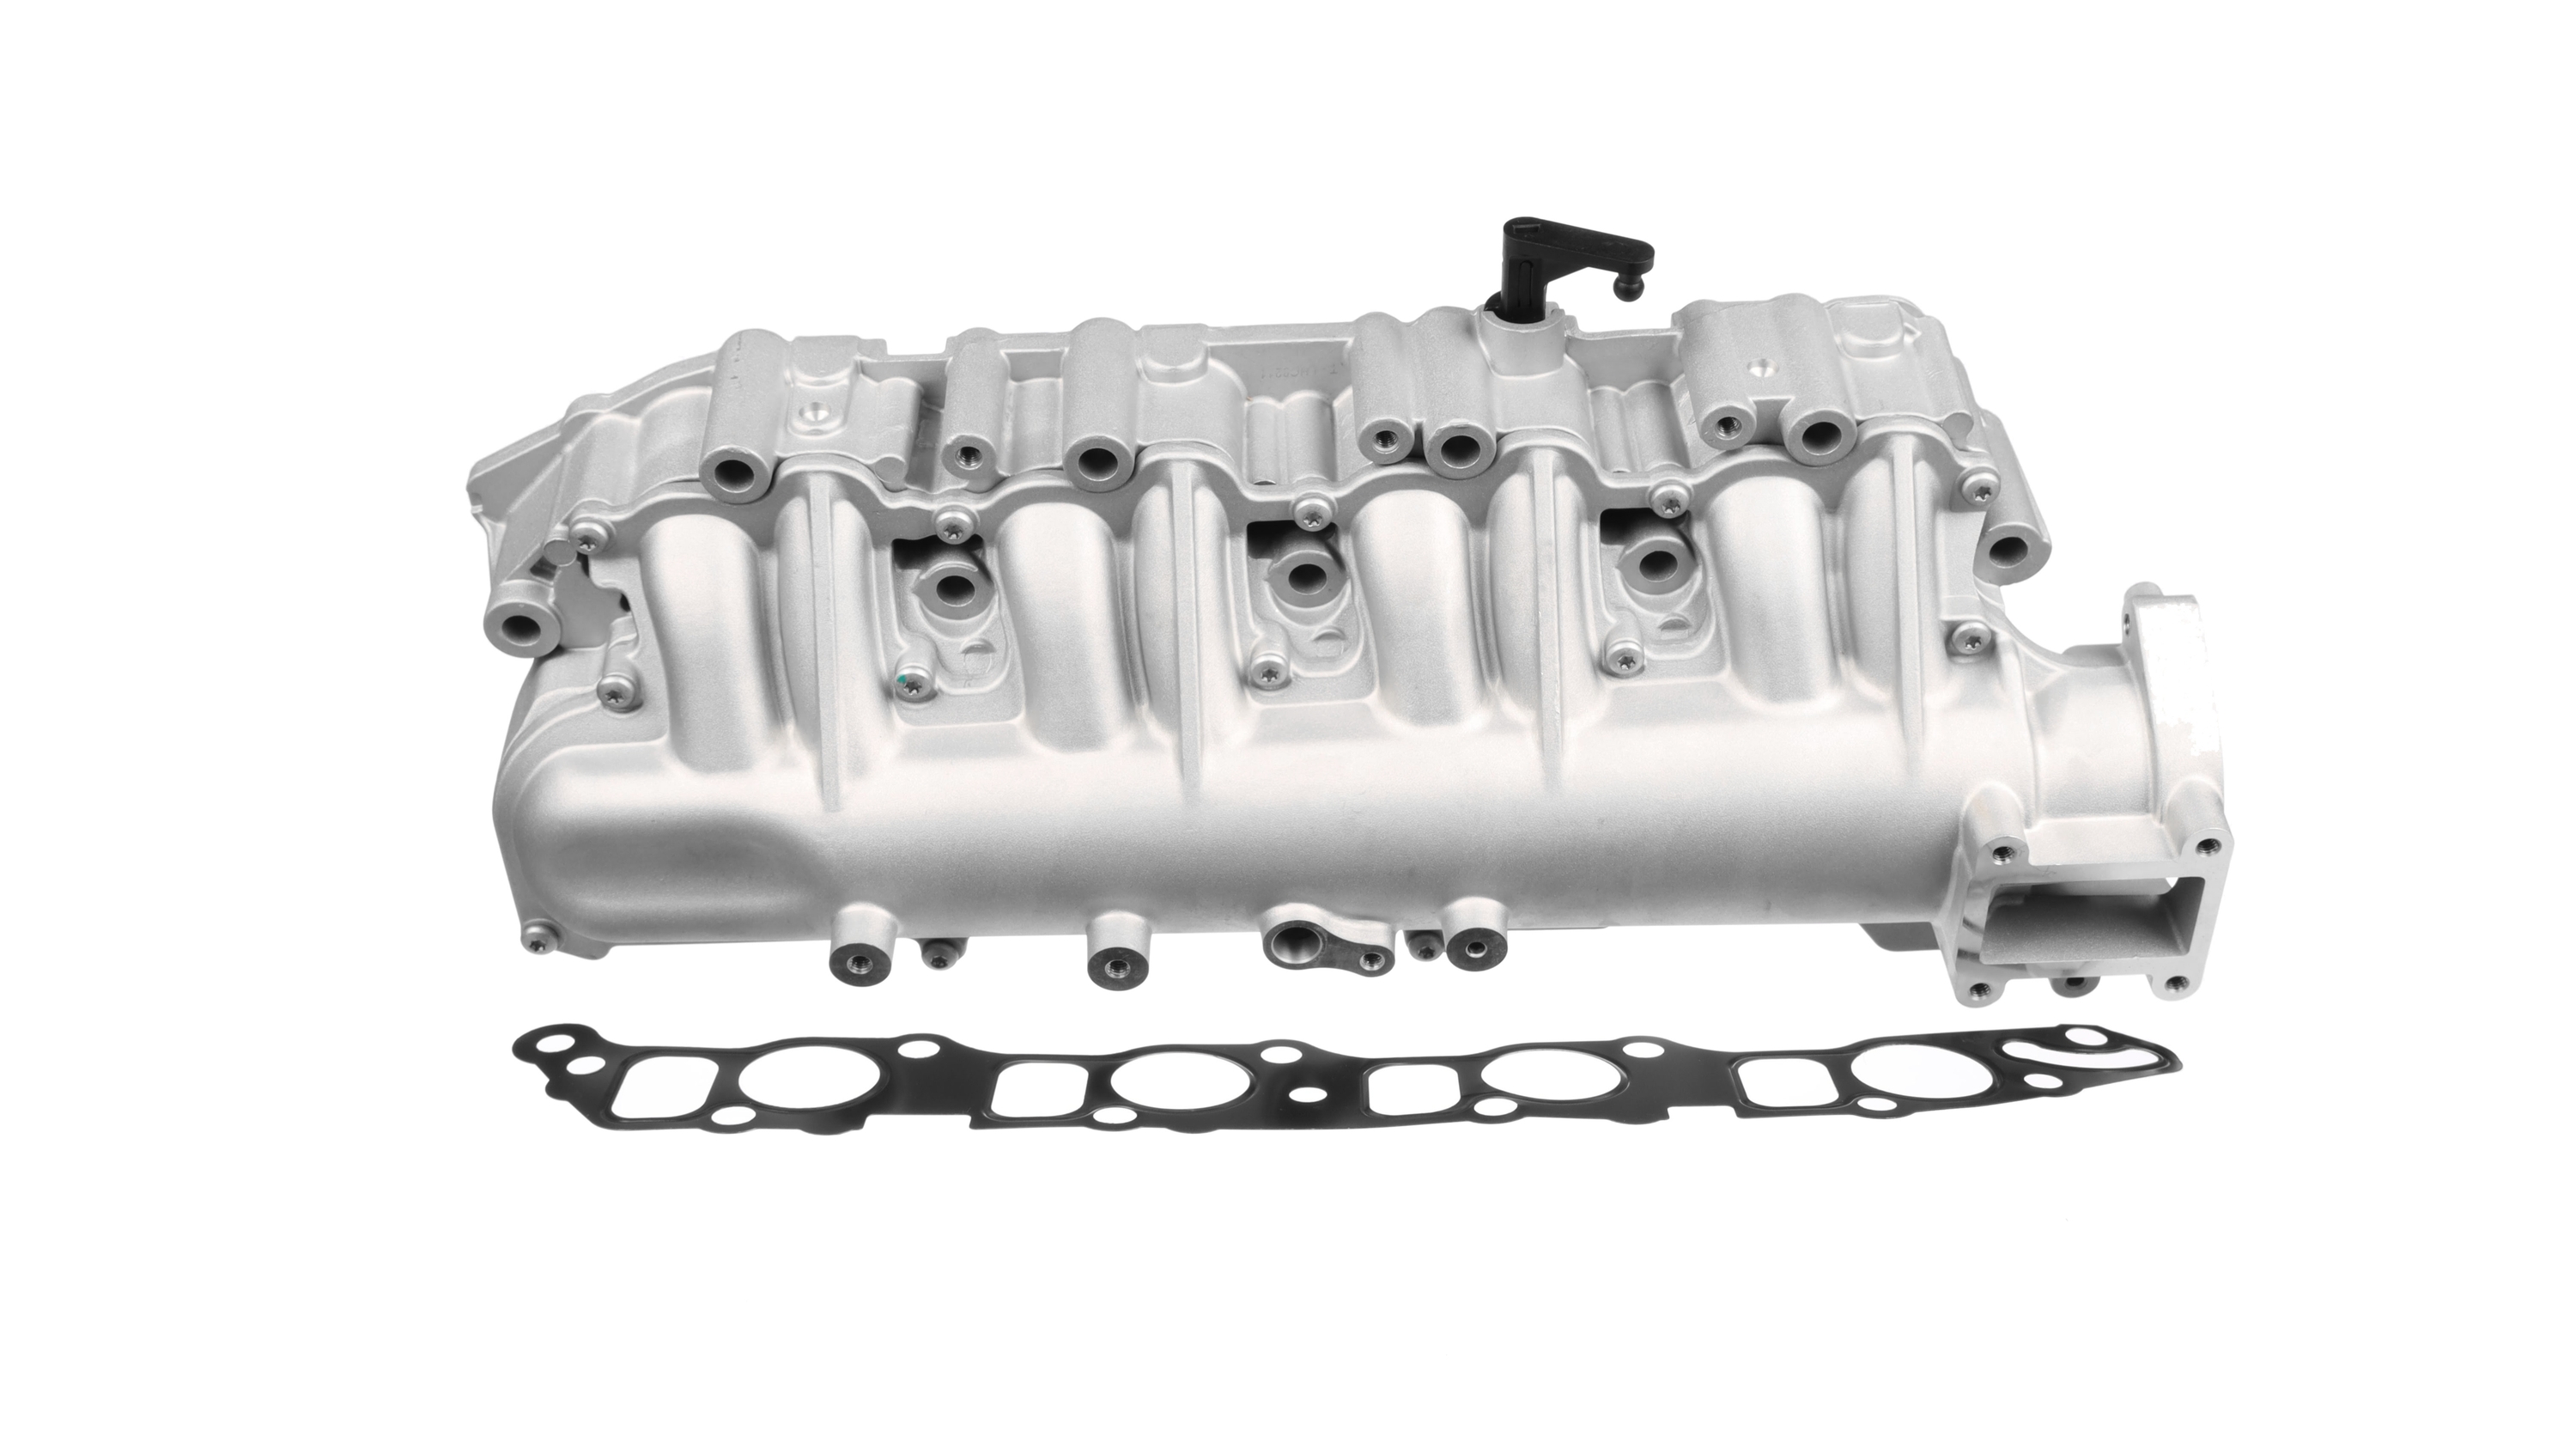 Fiat Inlet manifold ET ENGINETEAM ED0048VR1 at a good price